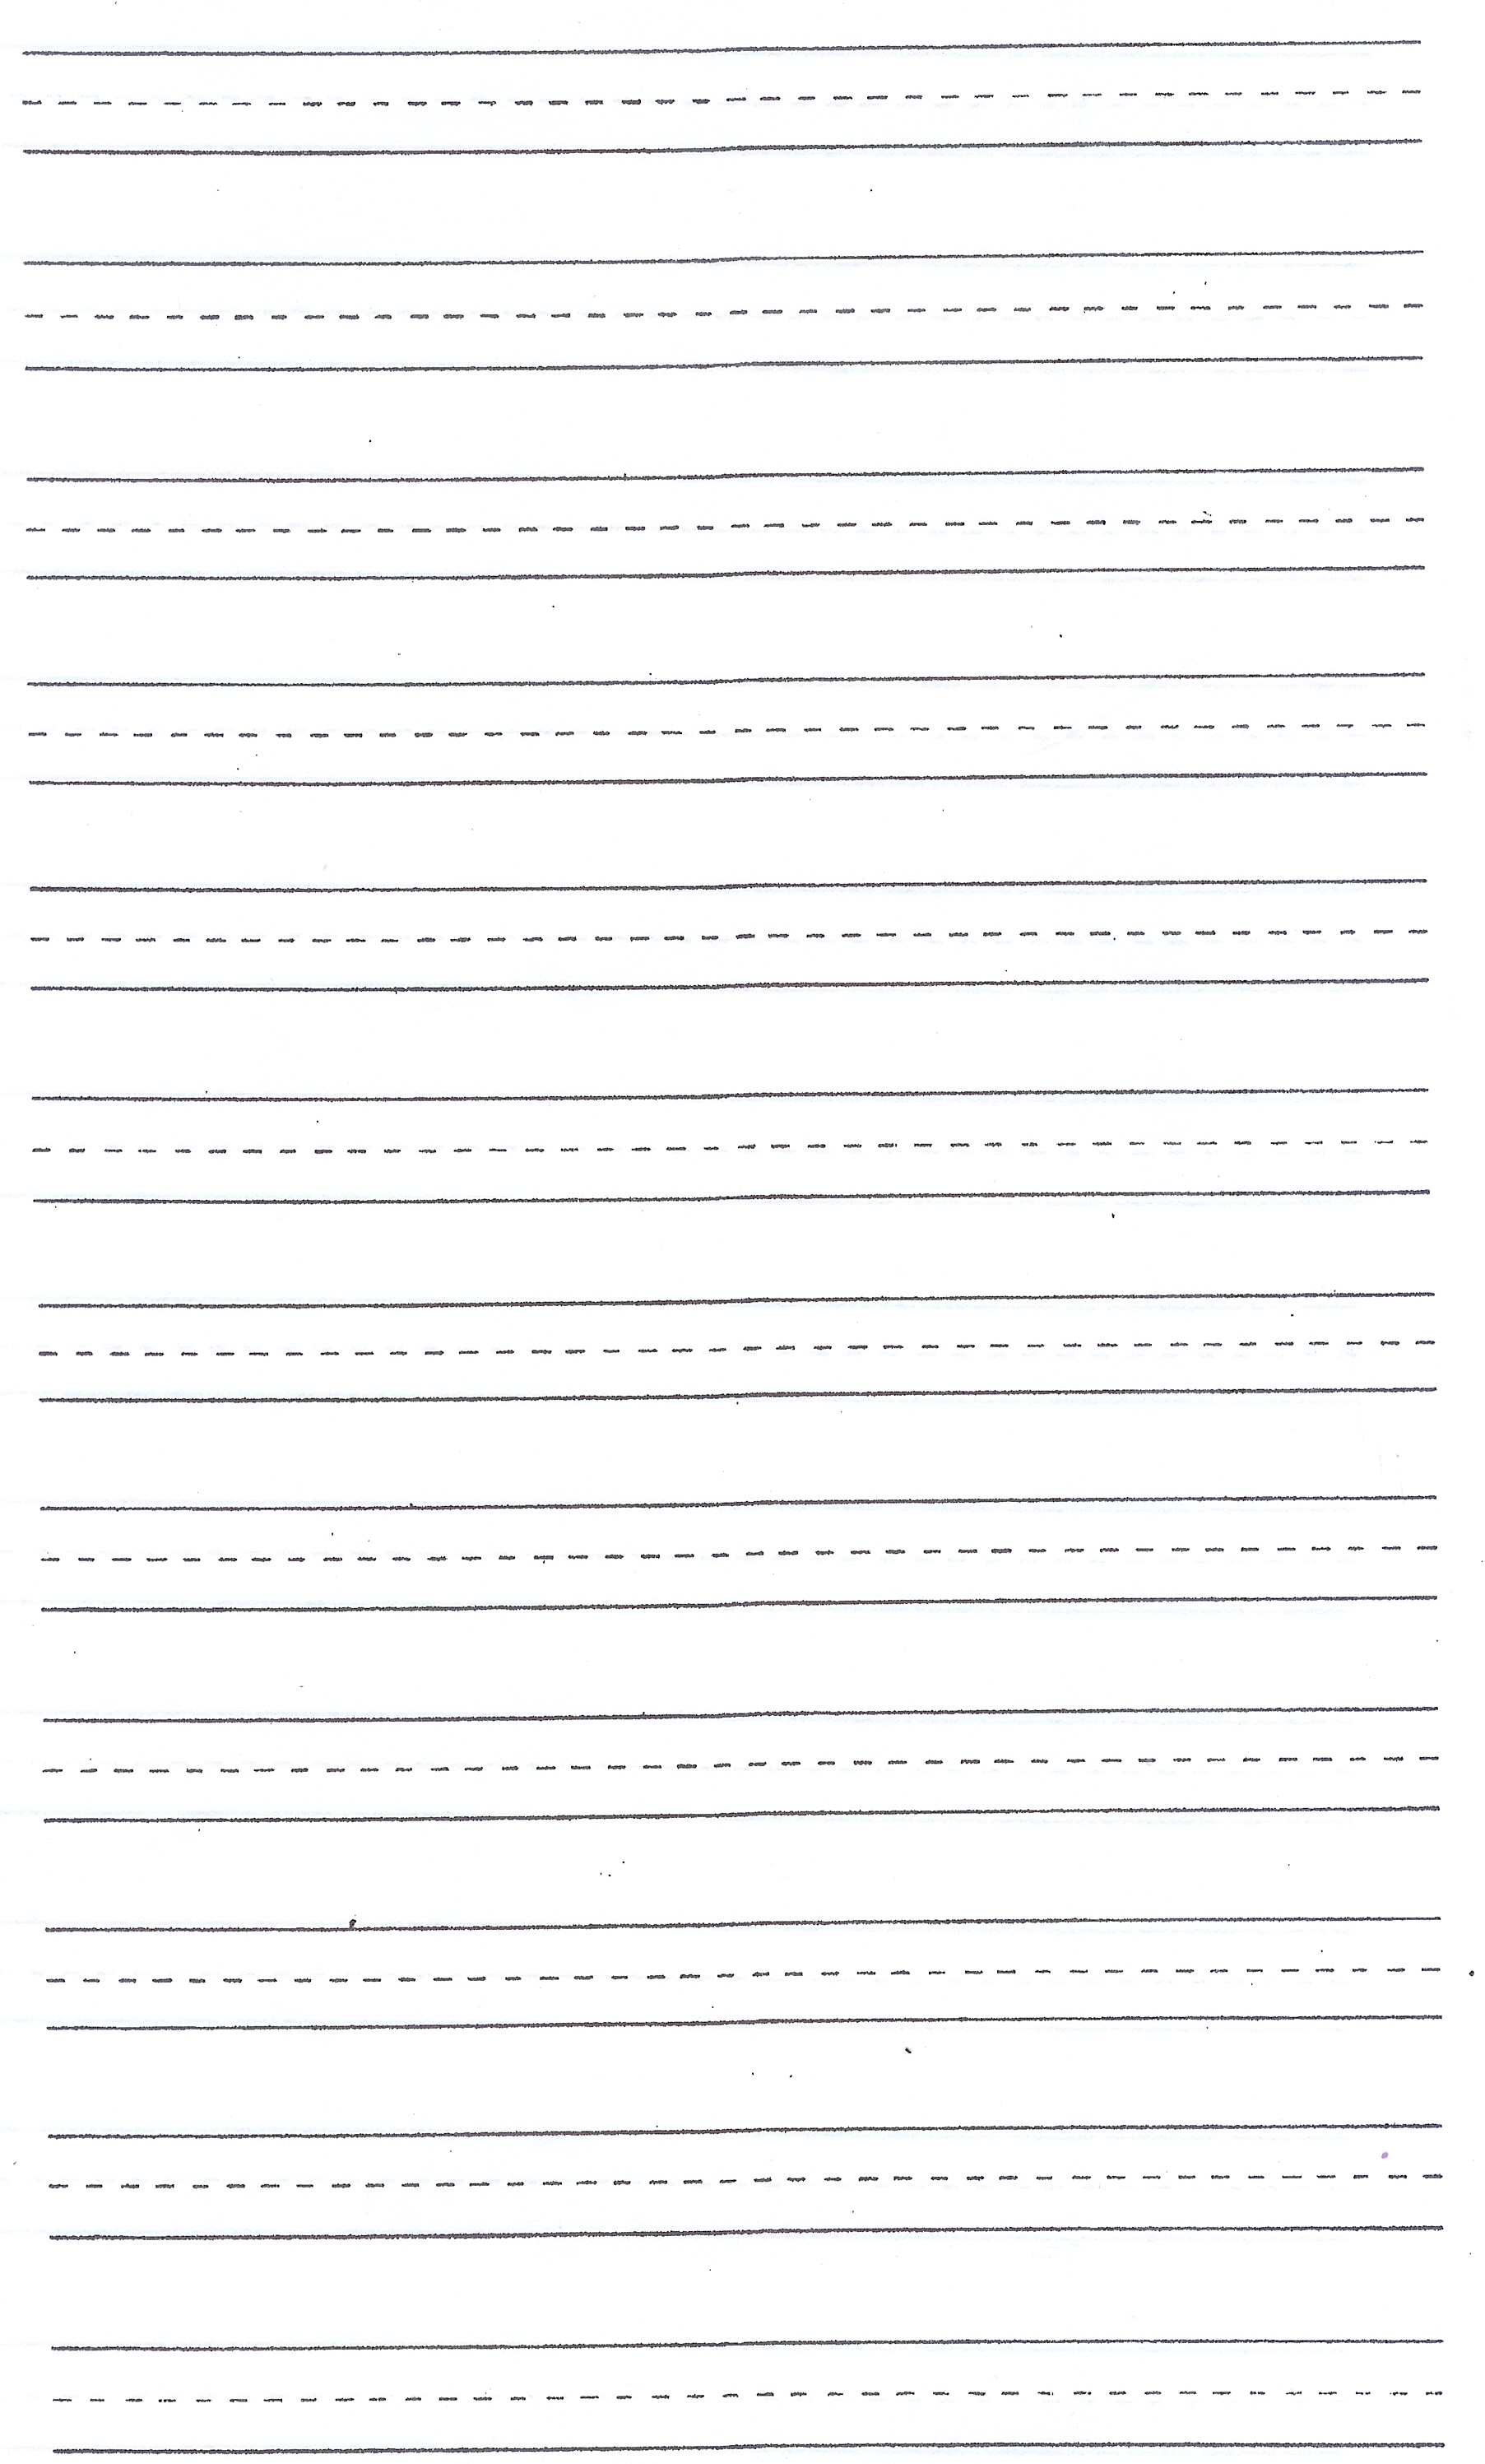 2nd-grade-blank-writing-paper-letters-to-2nd-grade-teachers-a